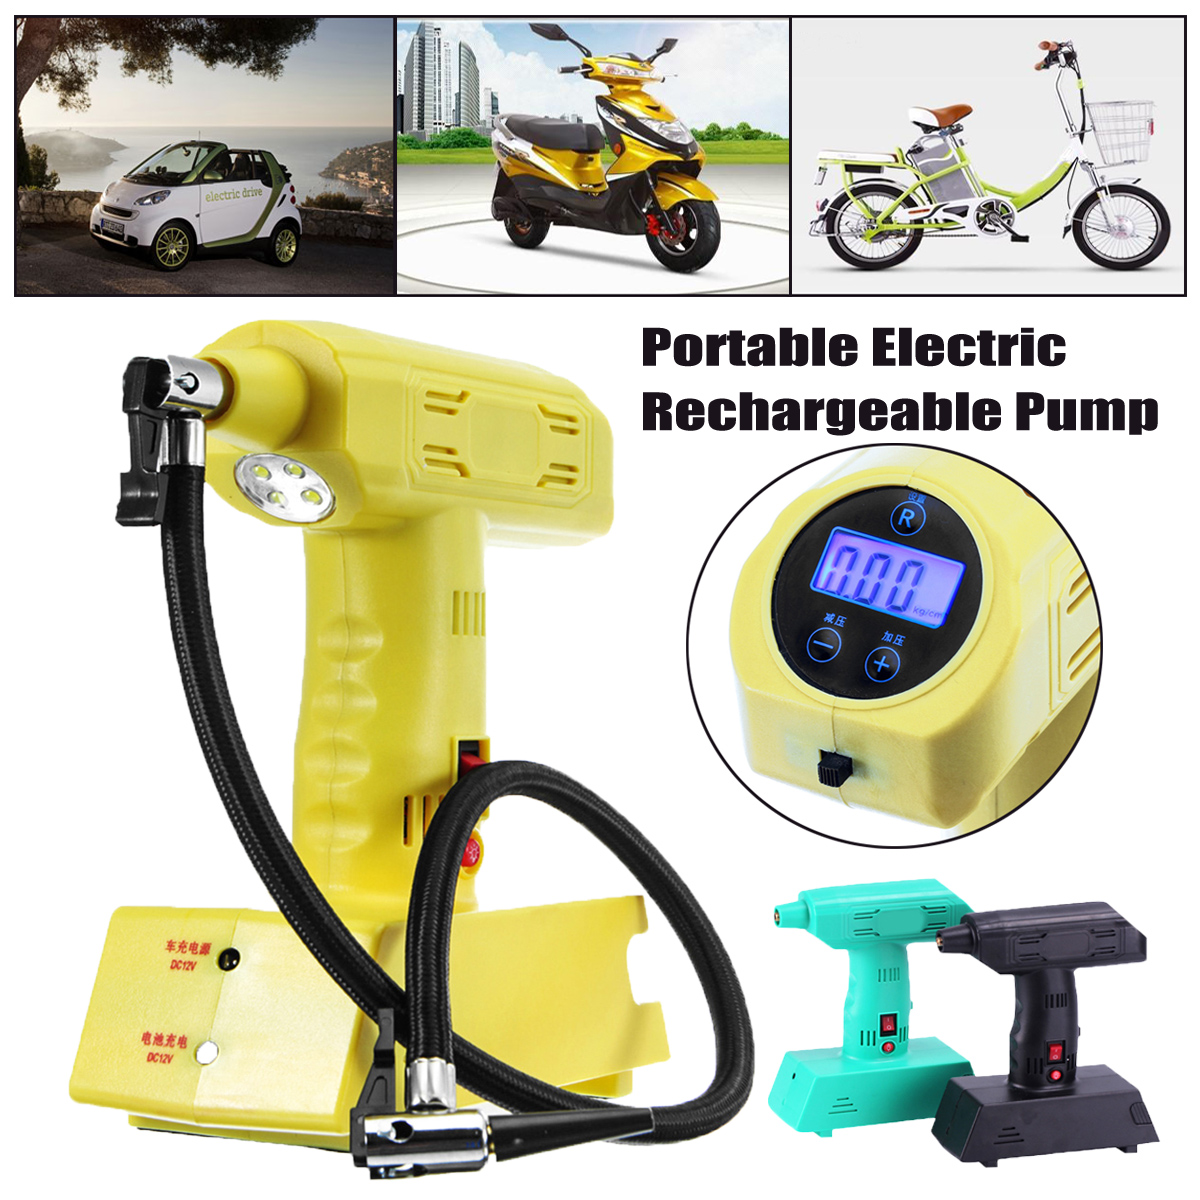 12V-Air-Compressor-Portable-Electric-Rechargeable-Pump-Cordless-Power-Inflator-with-USB-1254661-3